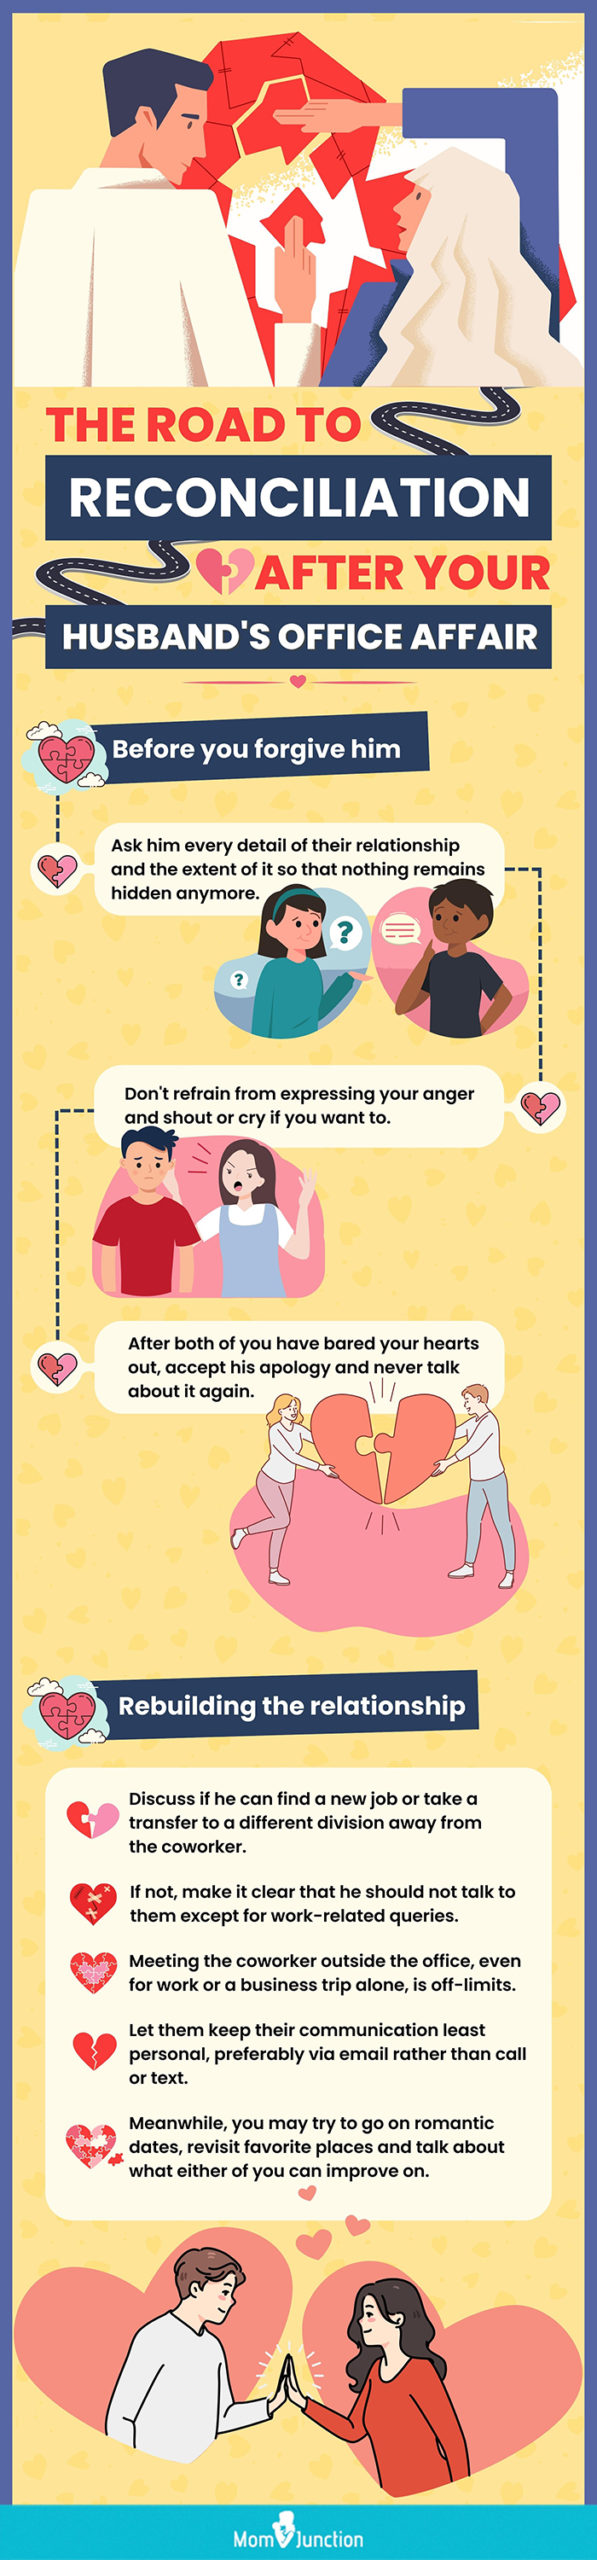 the road to reconciliation after your husband's office affair (infographic)